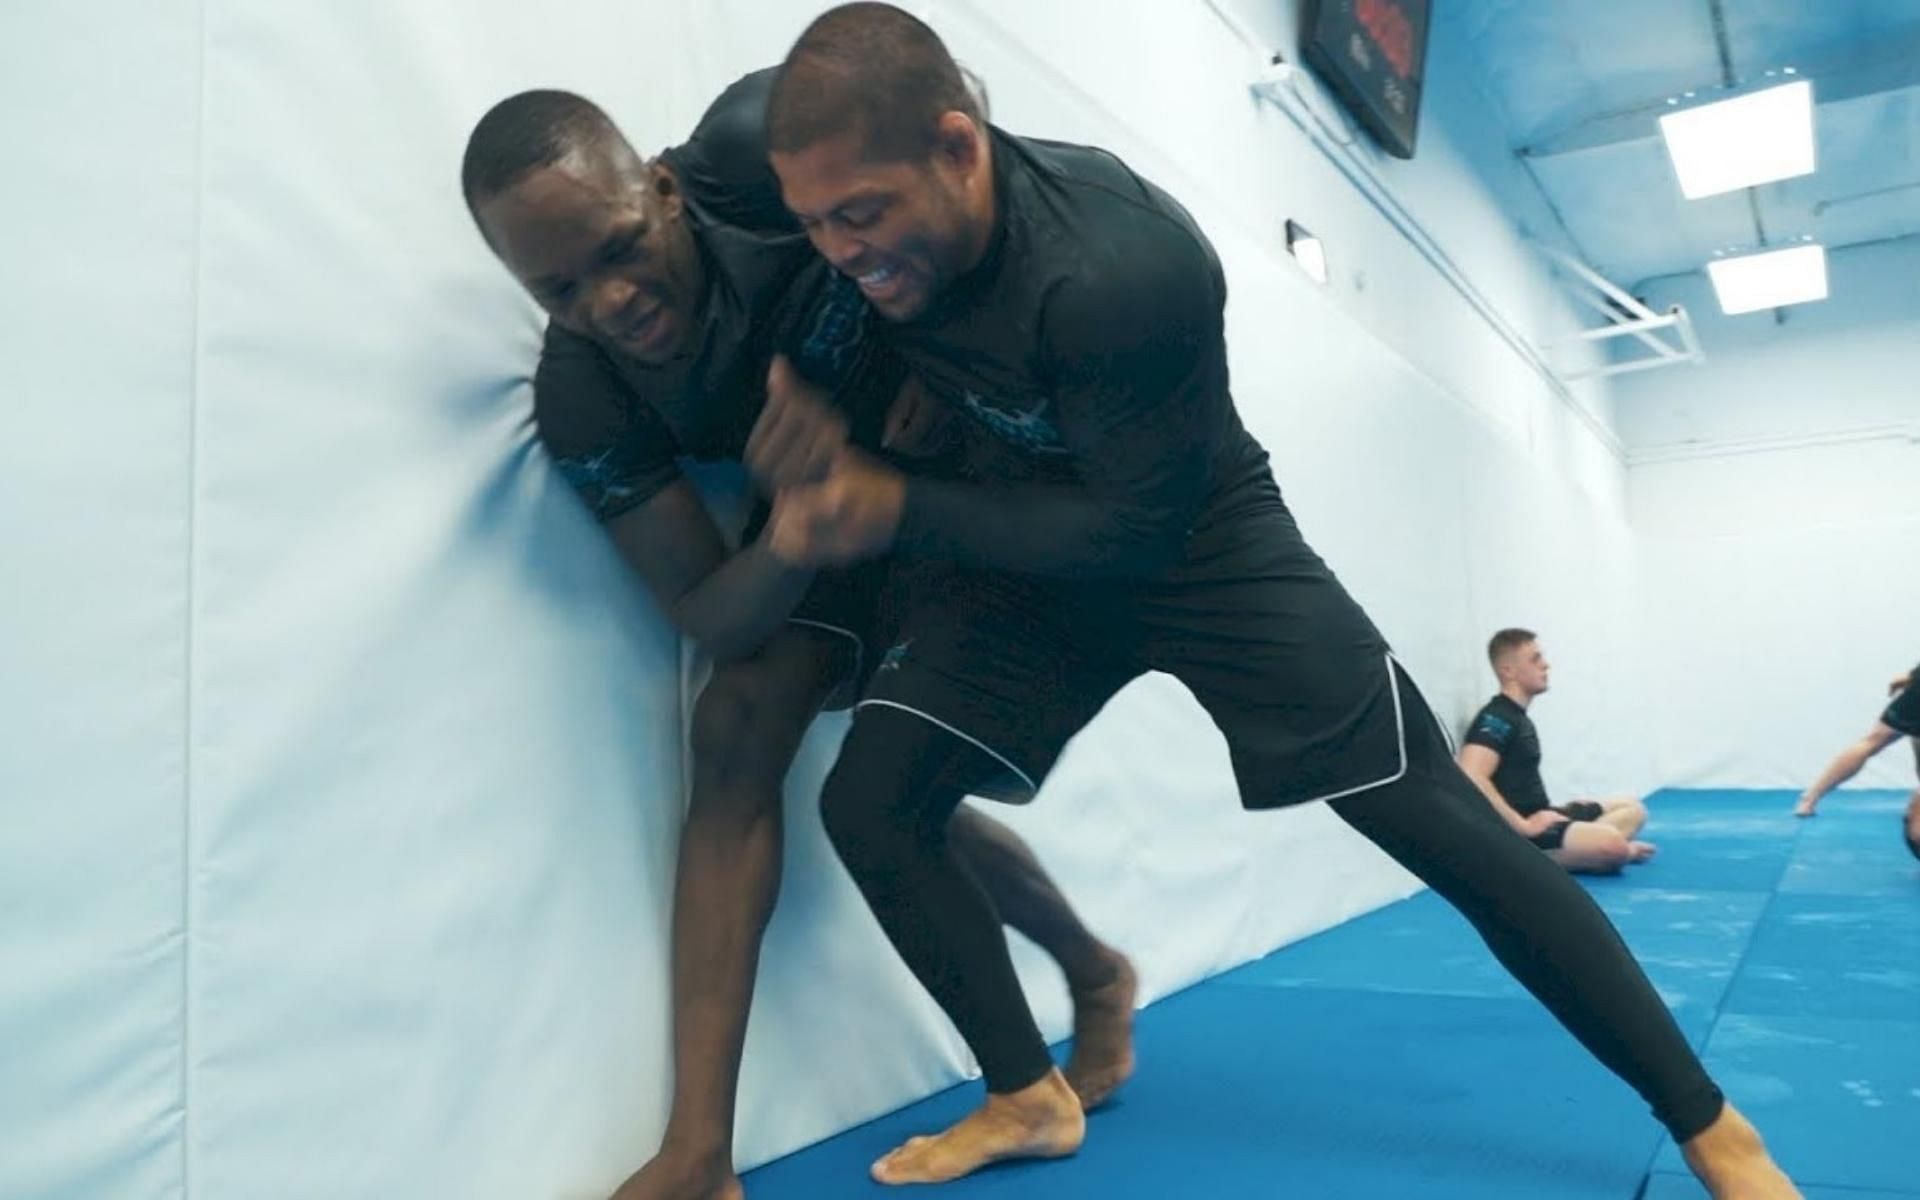 Israel Adesanya (left) trains grappling with Andre Galvao (right). Galvao takes on Reinier de Ridder in a grappling match at ONE X. [Image courtesy of FloGrappling&#039;s YouTube page]